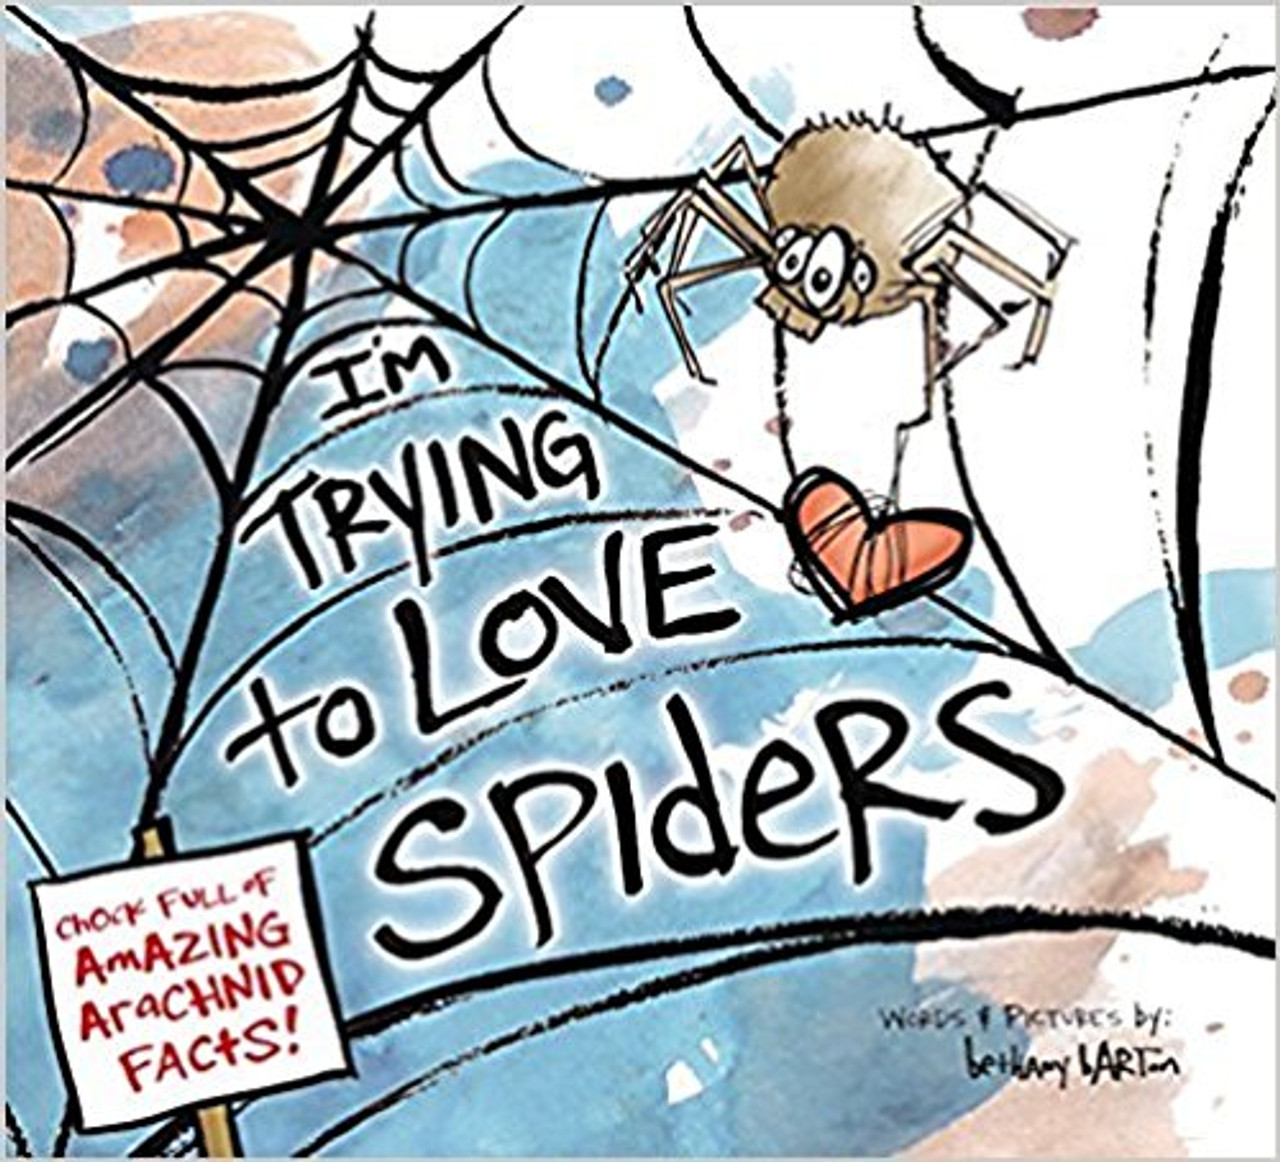 This fresh and very funny non-fiction picture book shares lots of fascinating facts about spiders in an entirely captivating way. If I'm Trying to Love Spiders doesn't cure your spider phobia, it'll at least make you appreciate how amazing they are...and laugh a lot as you learn about them